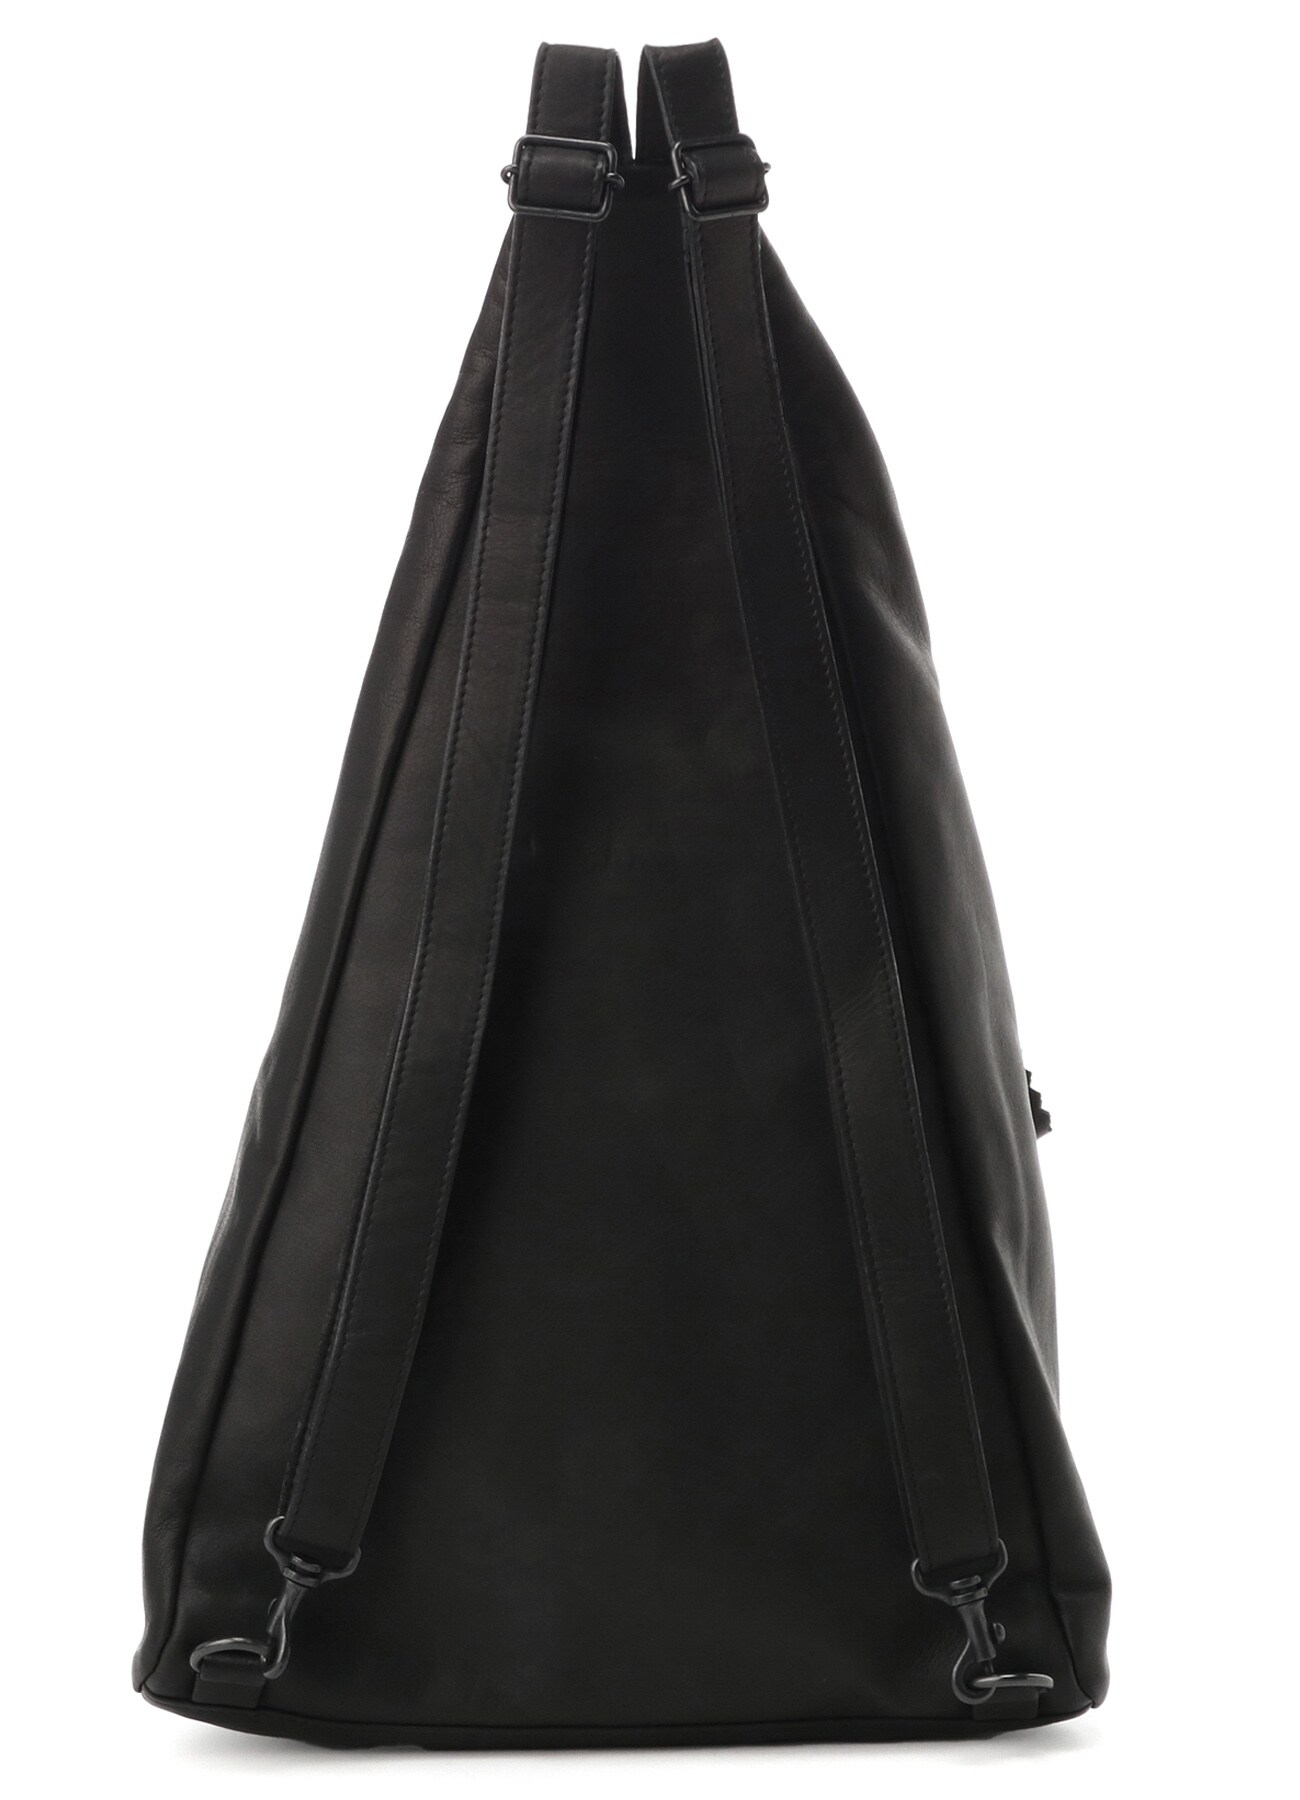 GARMENT LEATHER A SUG BACKPACK